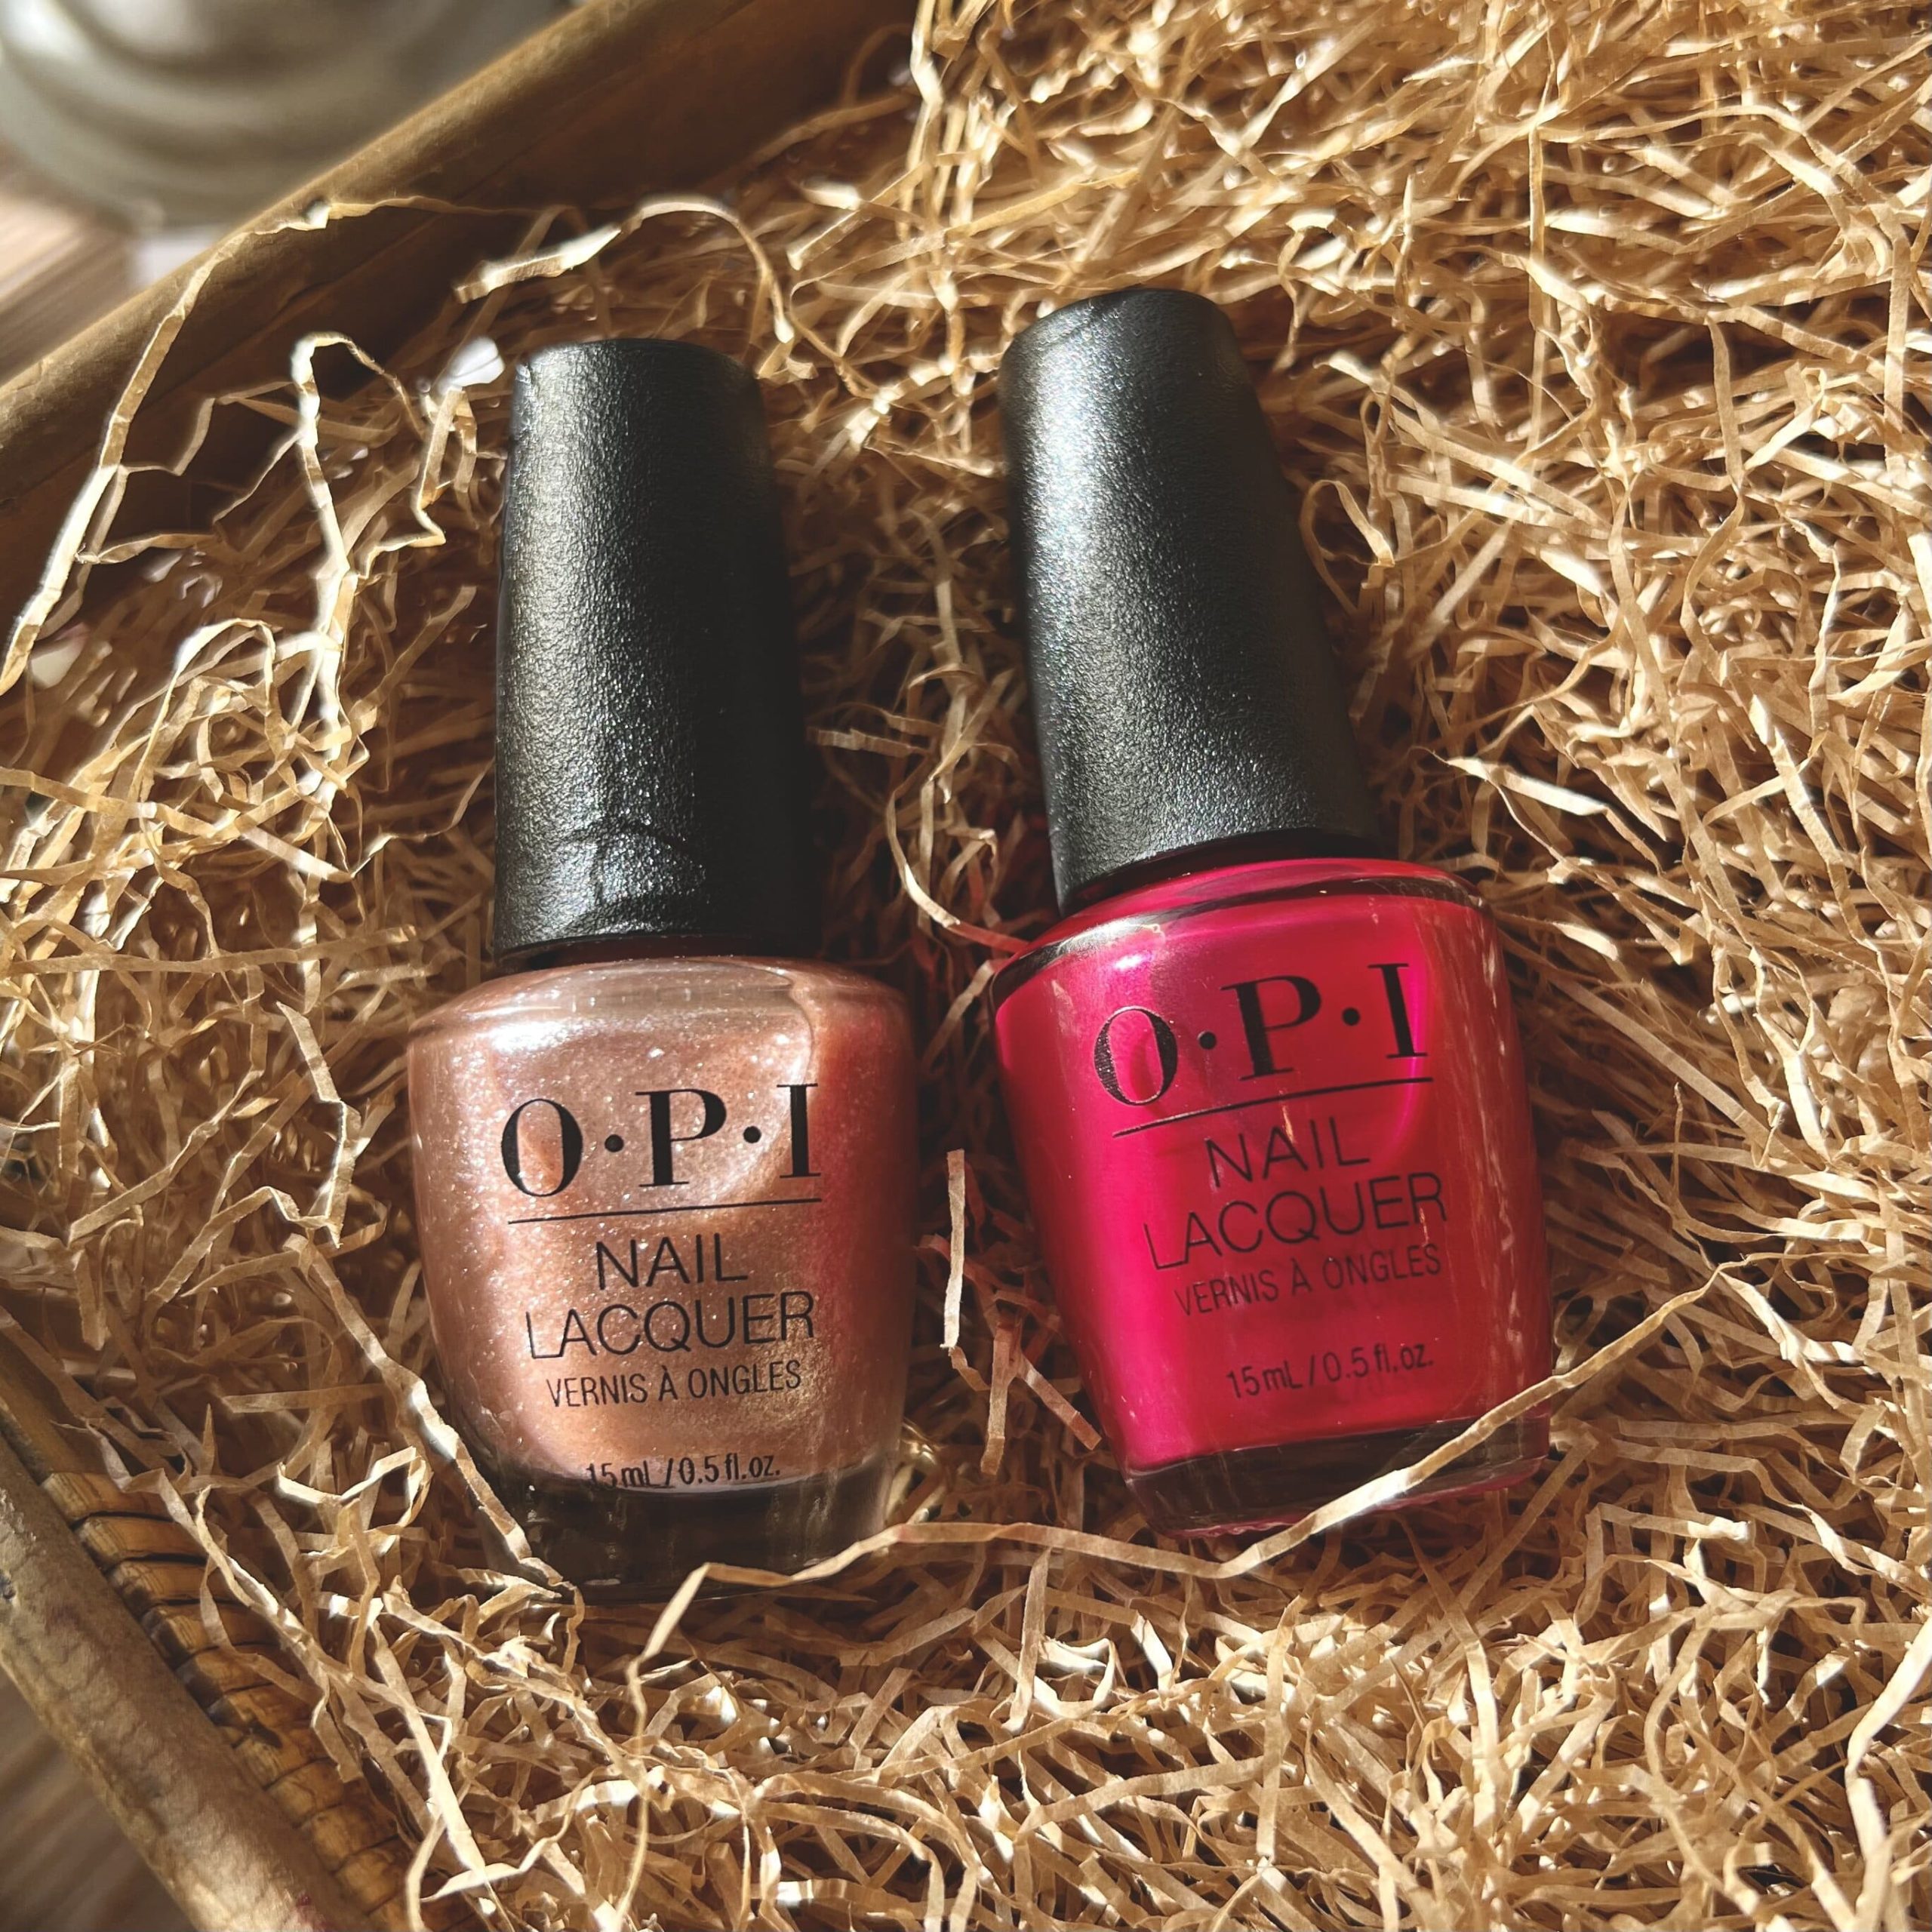 Two OPI nail polishes in a shimmery red and a metallic rose gold shade sit in a woven basket full of brown crinkle paper. 